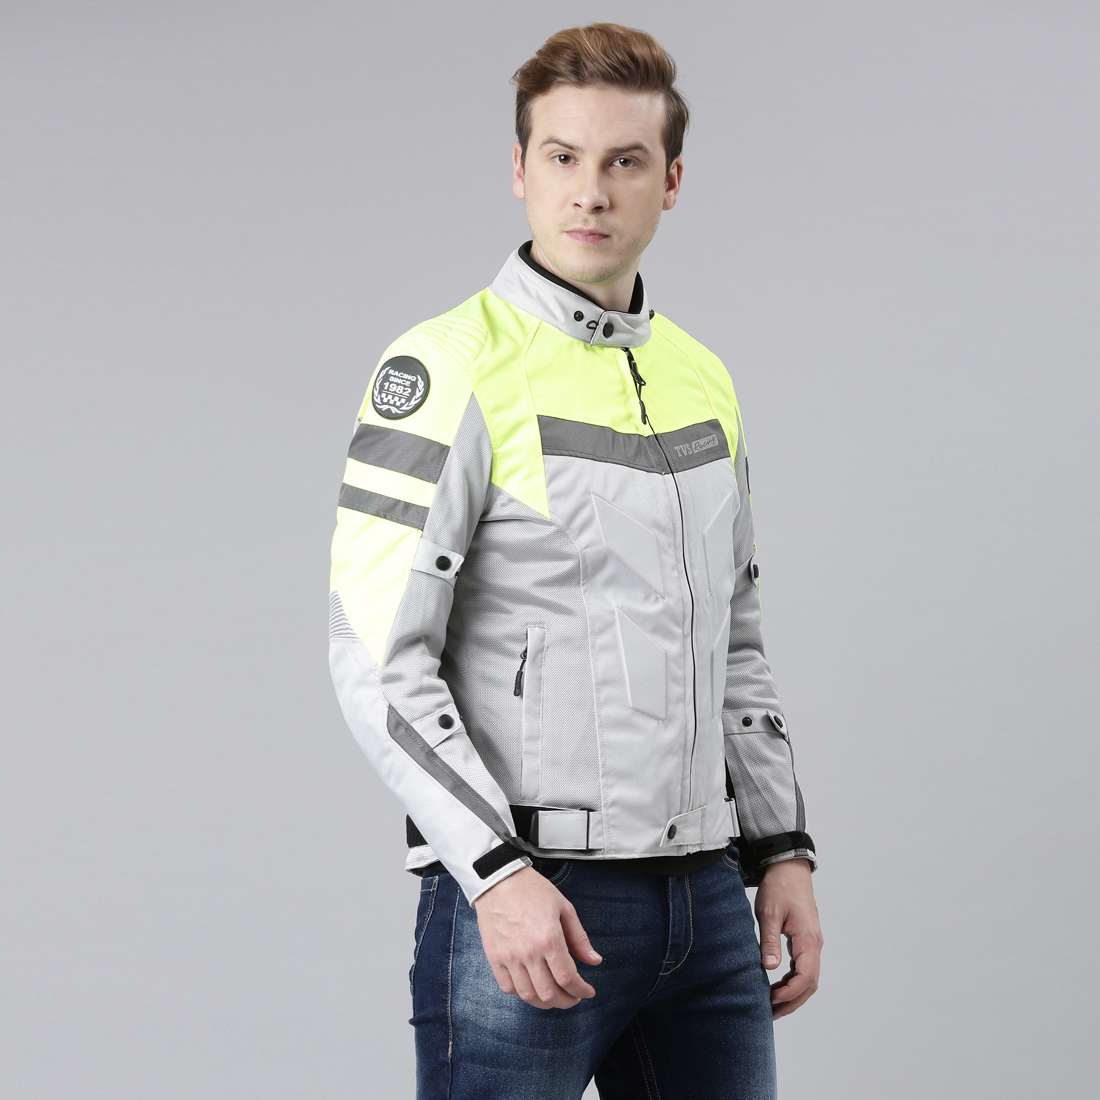  TVS Racing Challenger 3-Layer Riding Jacket for Men- All Weather Adaptability, CE Level 2 Armour Protection – Premium Bike Jackets for Bikers (Grey)